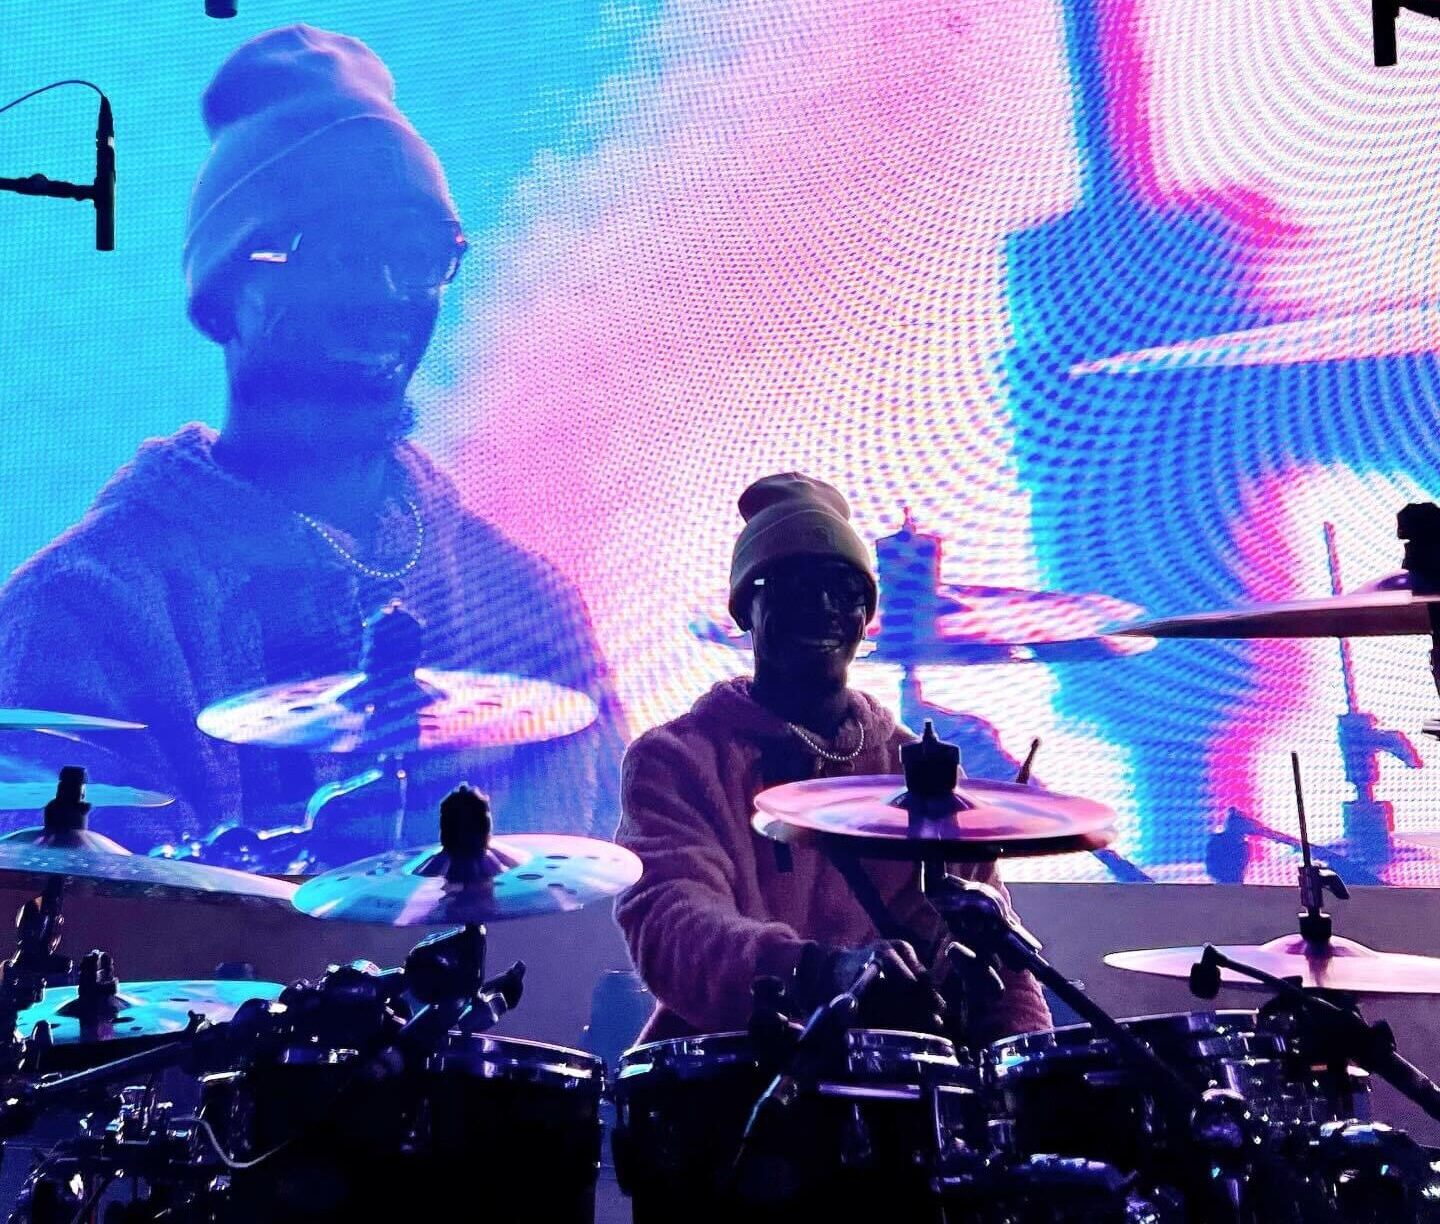 A drummer on stage performing, with a vibrant backdrop LED screen displaying an enlarged image of him in the background.